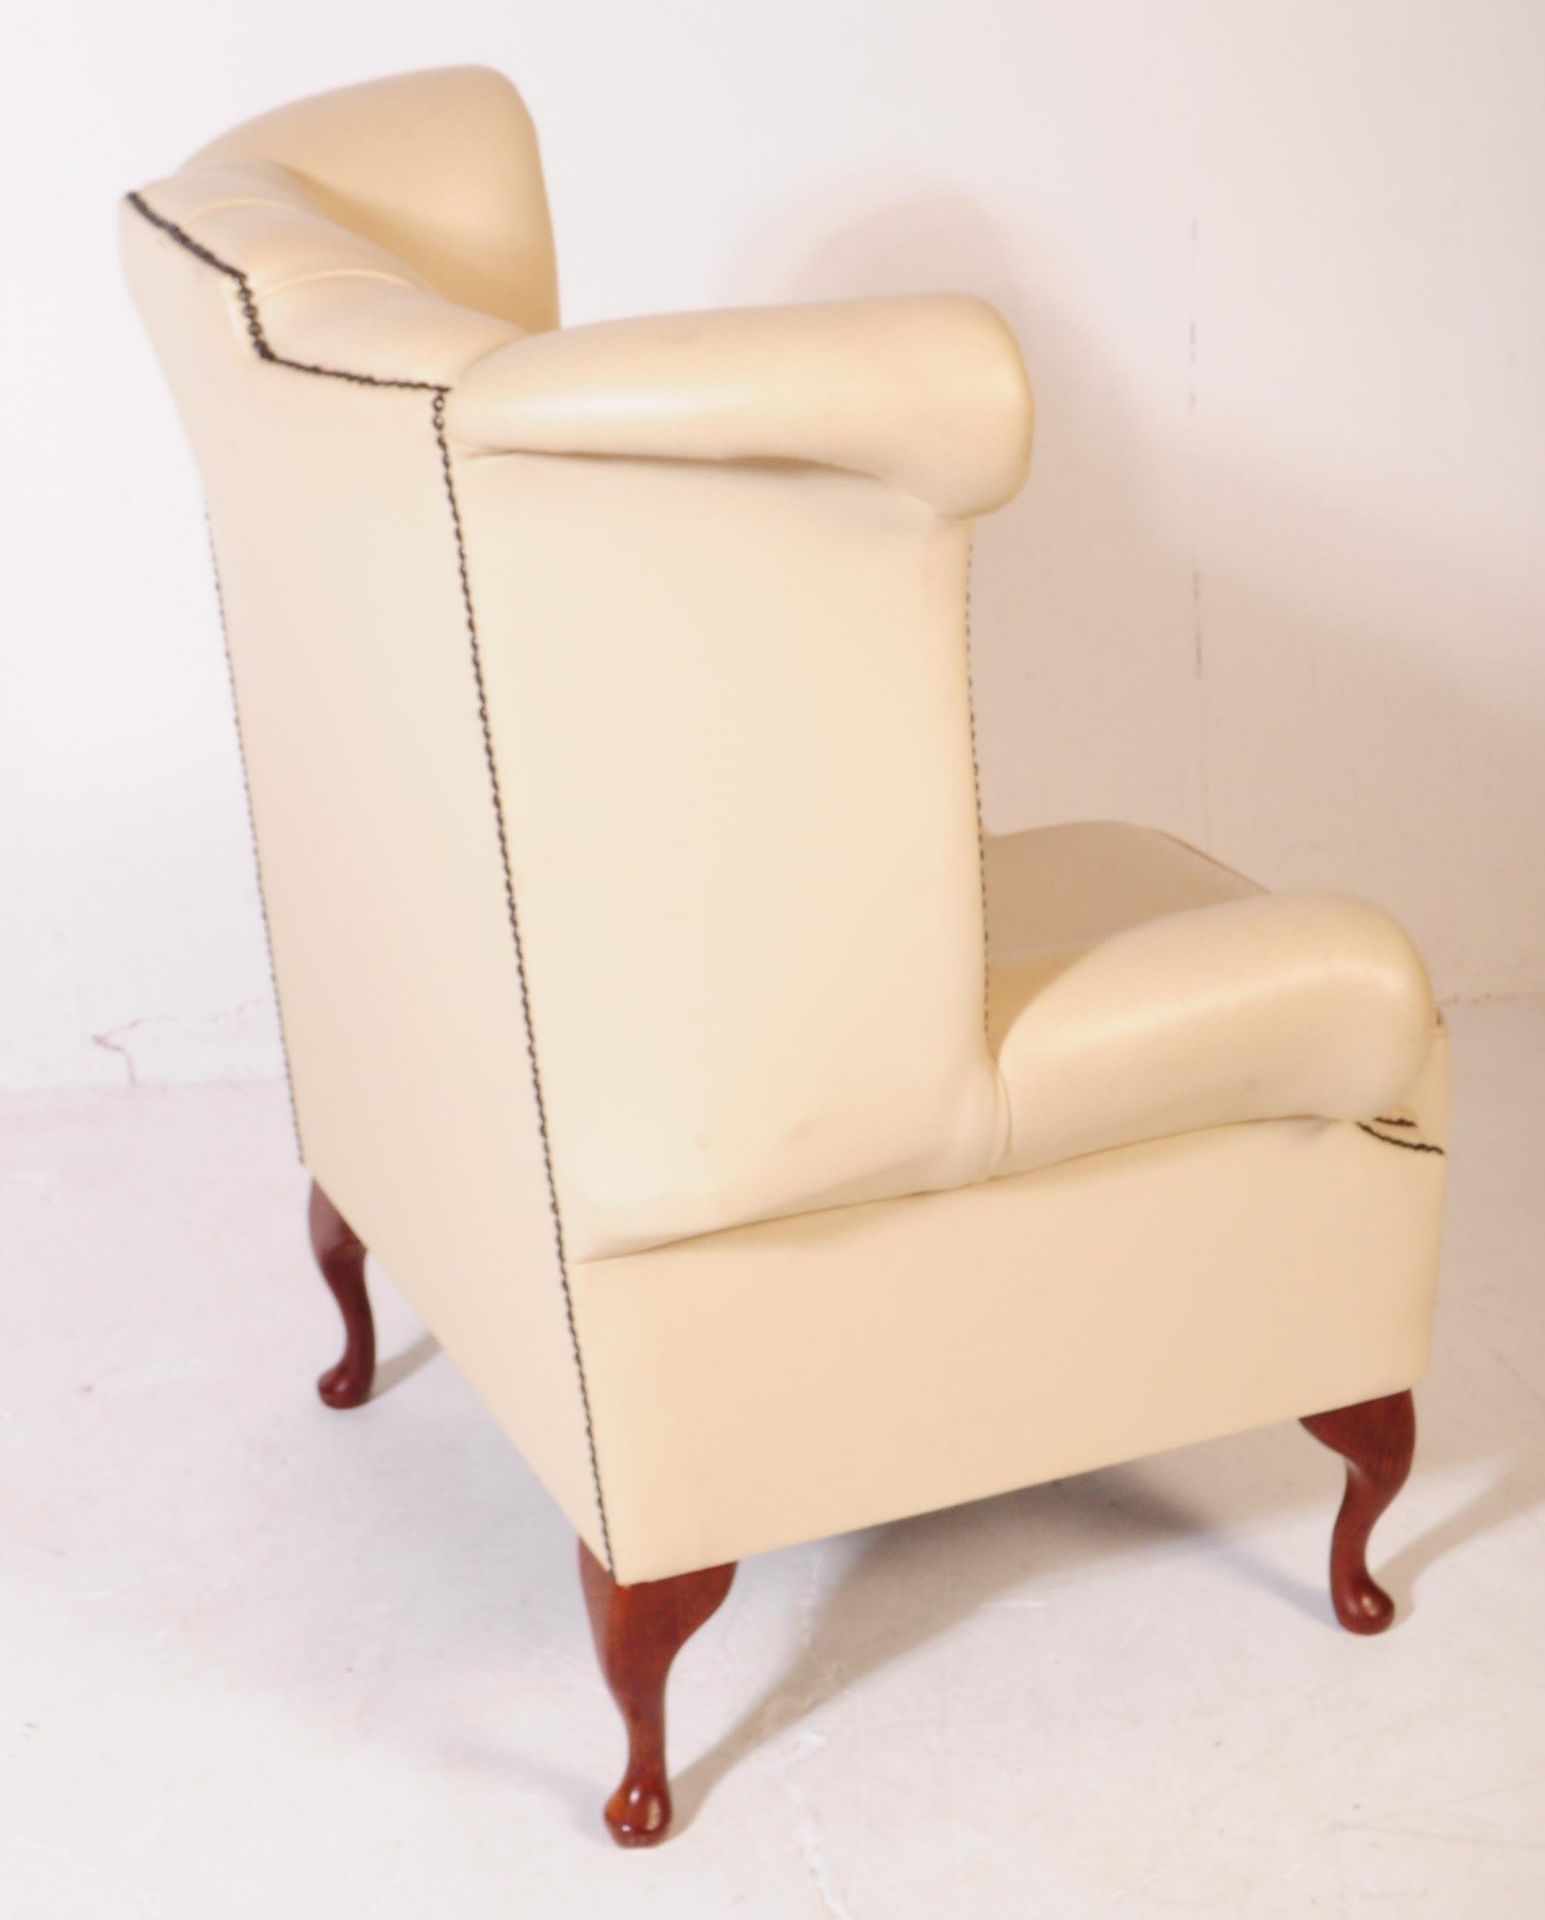 CONTEMPORARY QUEEN ANNE REVIVAL LEATHER ARMCHAIR - Image 4 of 7